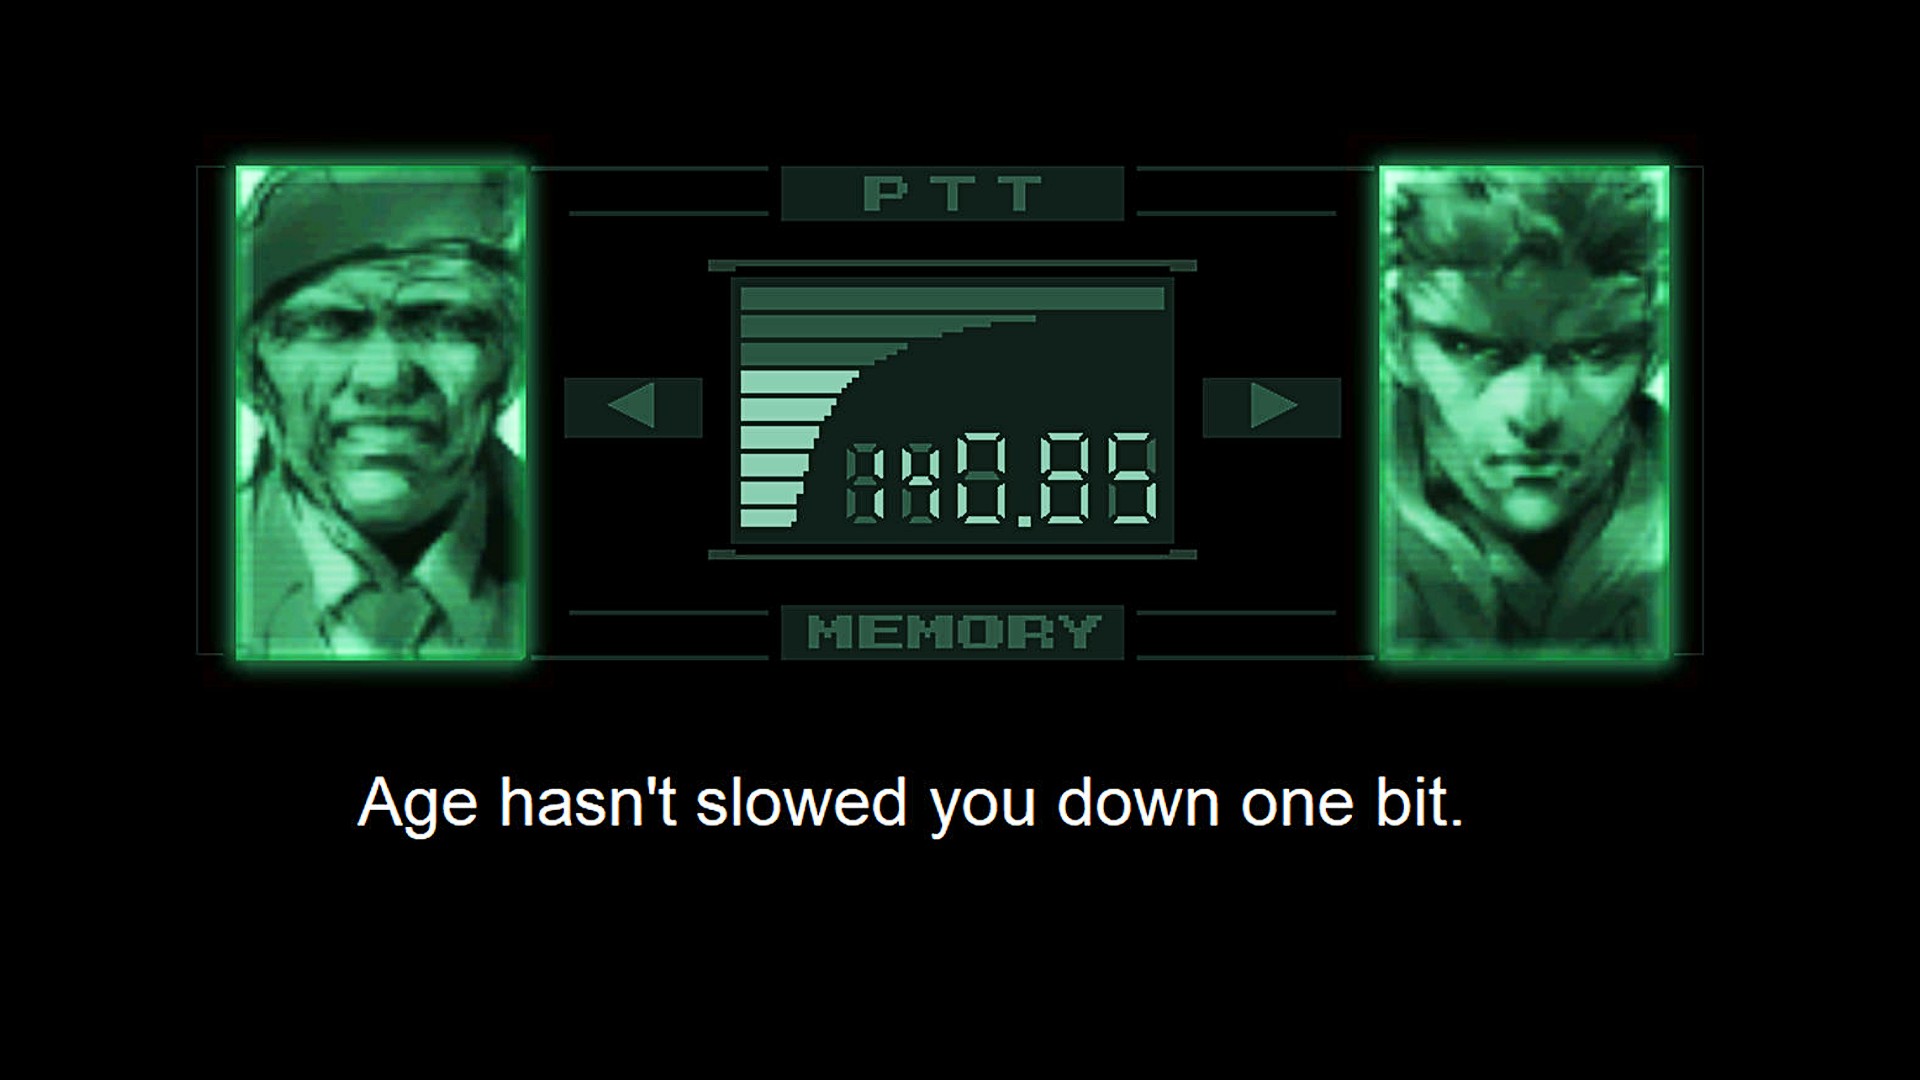 A dialogue box in Metal Gear Solid